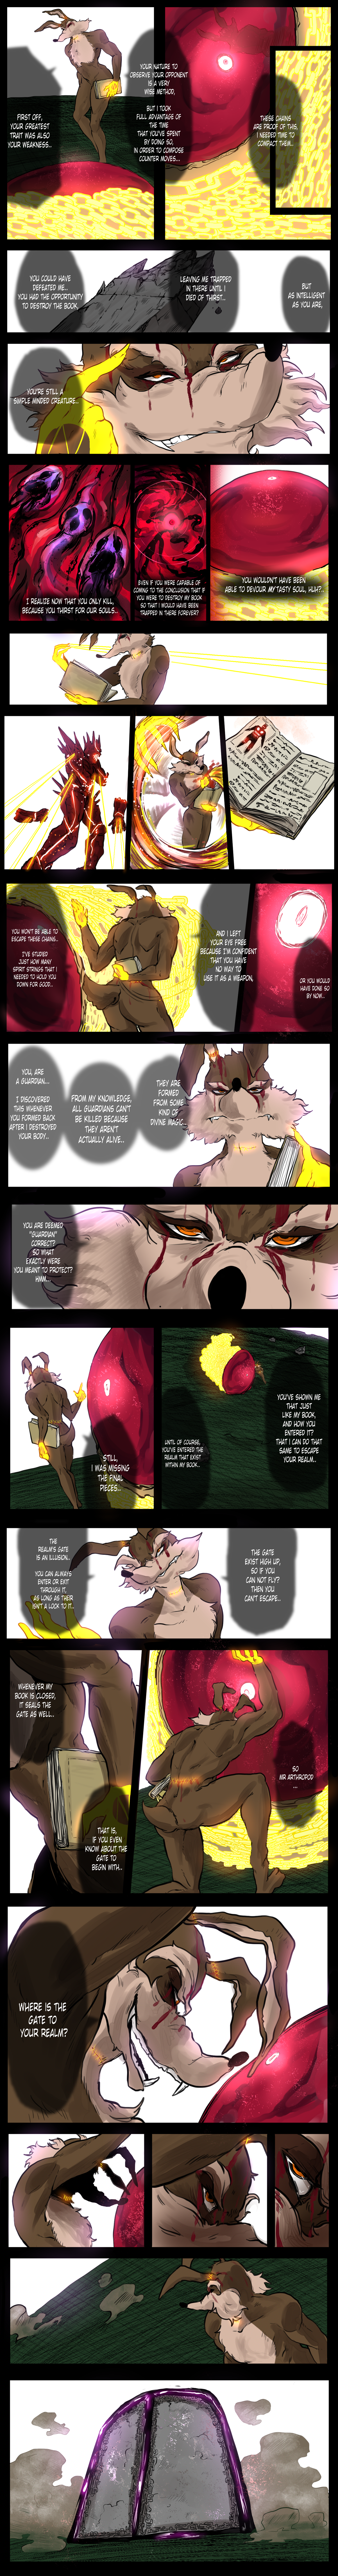 ch23/pg16.png. If you're seeing this, enable images. Or, perhaps we have a website issue. Try refreshing, if unsuccessful email commodorian@tailsgetstrolled.org with a detailed description of how you got here.